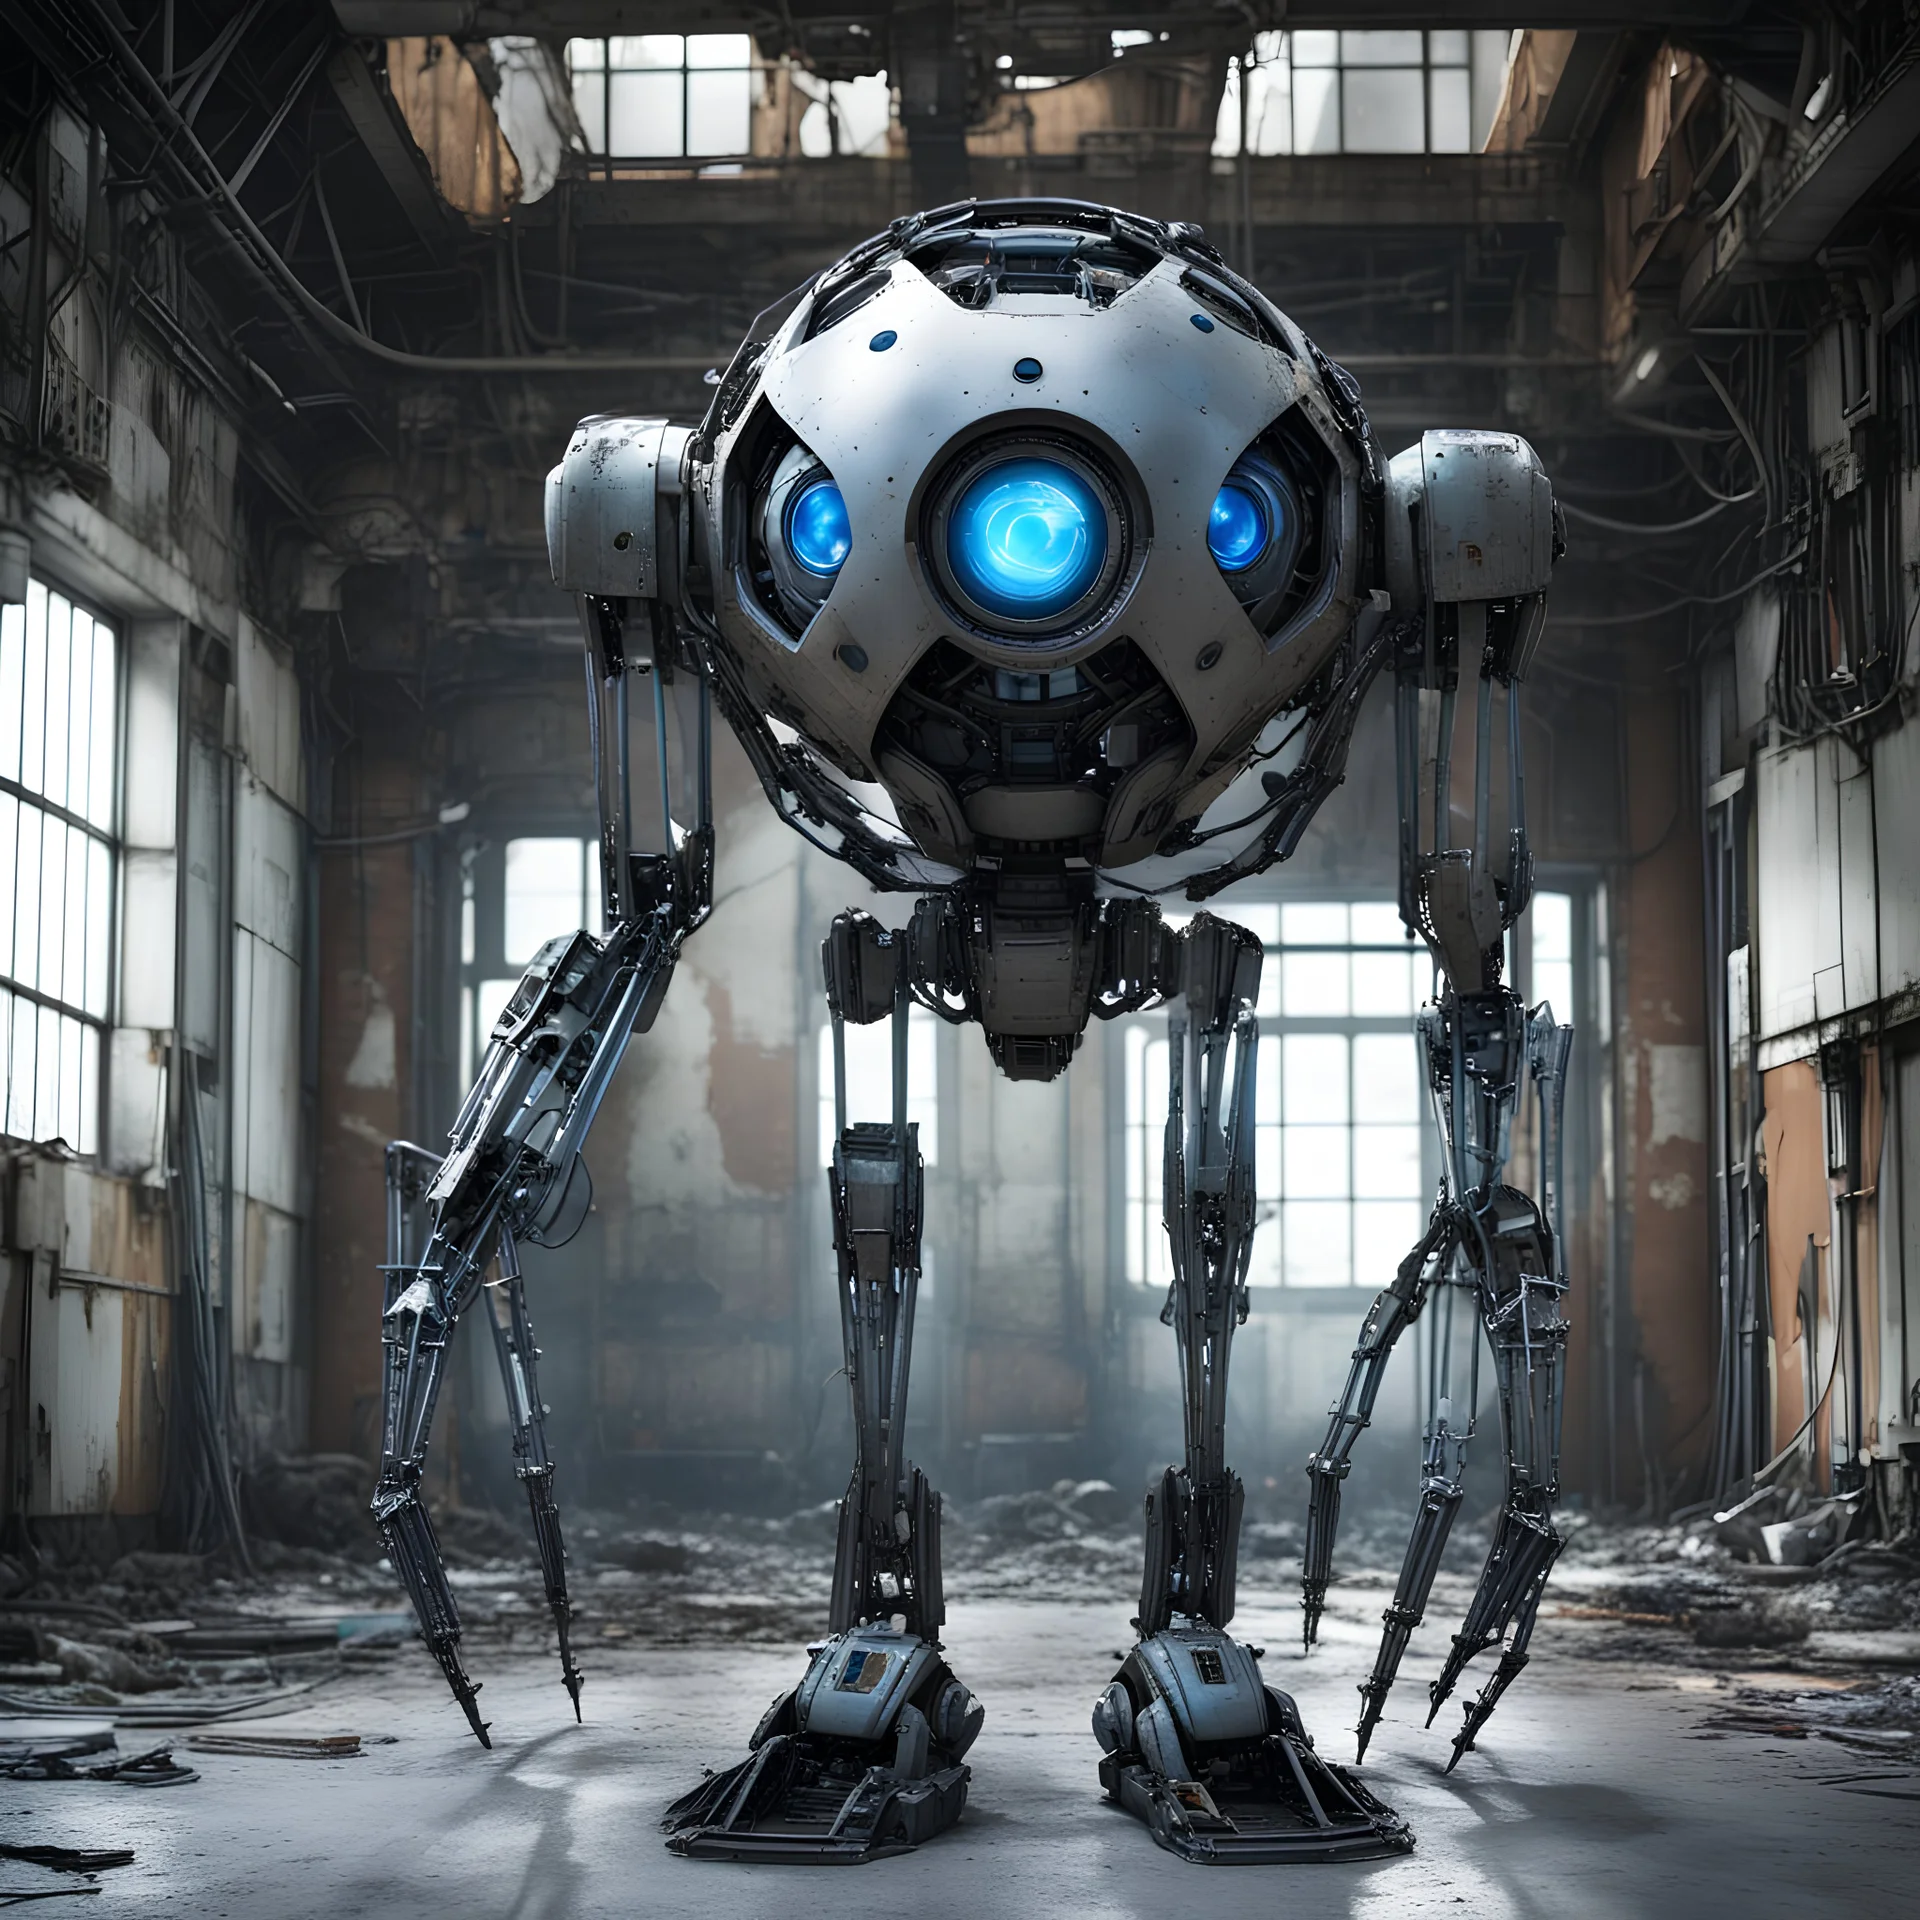 A colossal robotic entity standing in a dilapidated room. The robot has a spherical upper body with a singular blue eye in the cente r, and its legs are made of interconnected metal segments. The robot's body exhibits signs of wear and tear, with rust and patches of corrosion. The room itself is in a state of decay, with broken walls, debris on the floor, and a beam of light penetrating from above, illuminating the robot and casting shadows on the walls., illustration, painting, dark fantasy